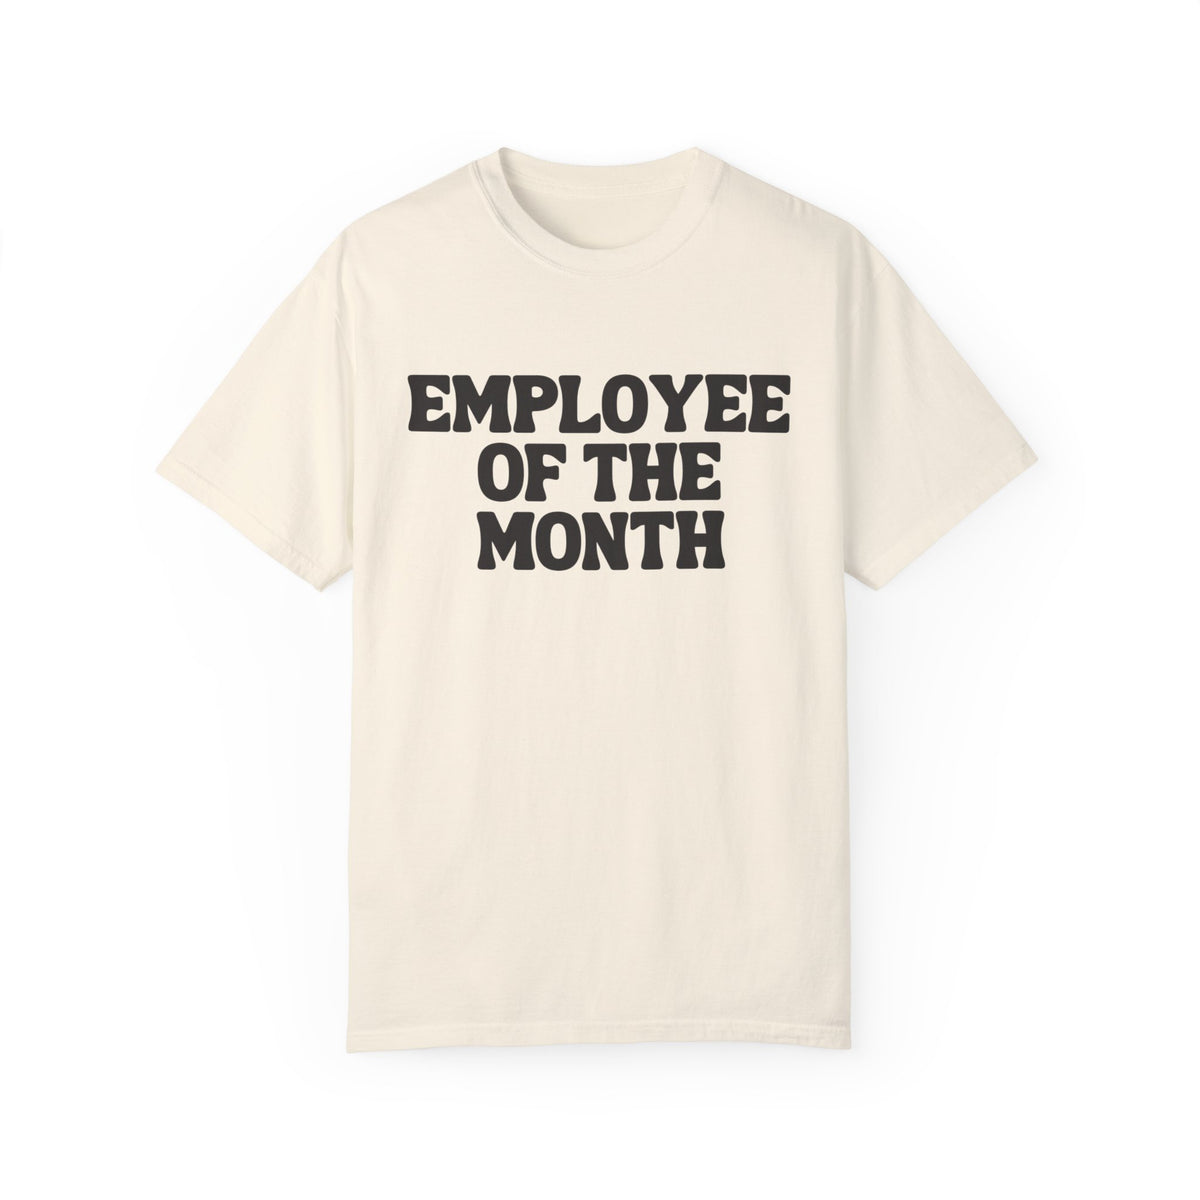 Employee of the Month Comfort Colors Unisex Garment-Dyed T-shirt